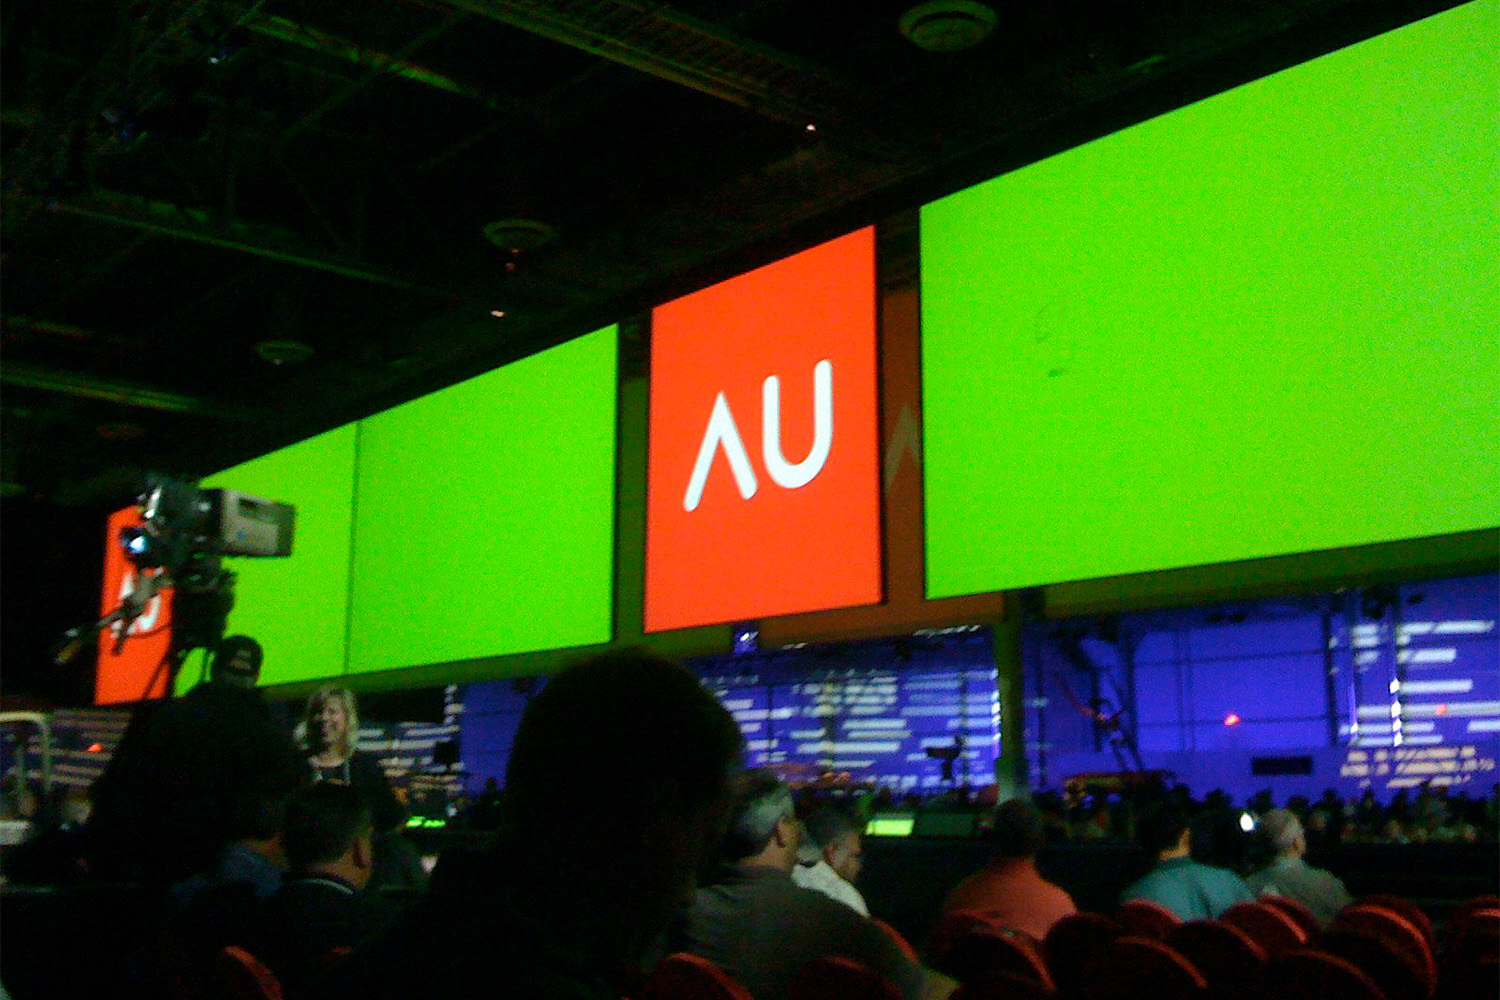 several monitors hanging from wall, saying "AU" 